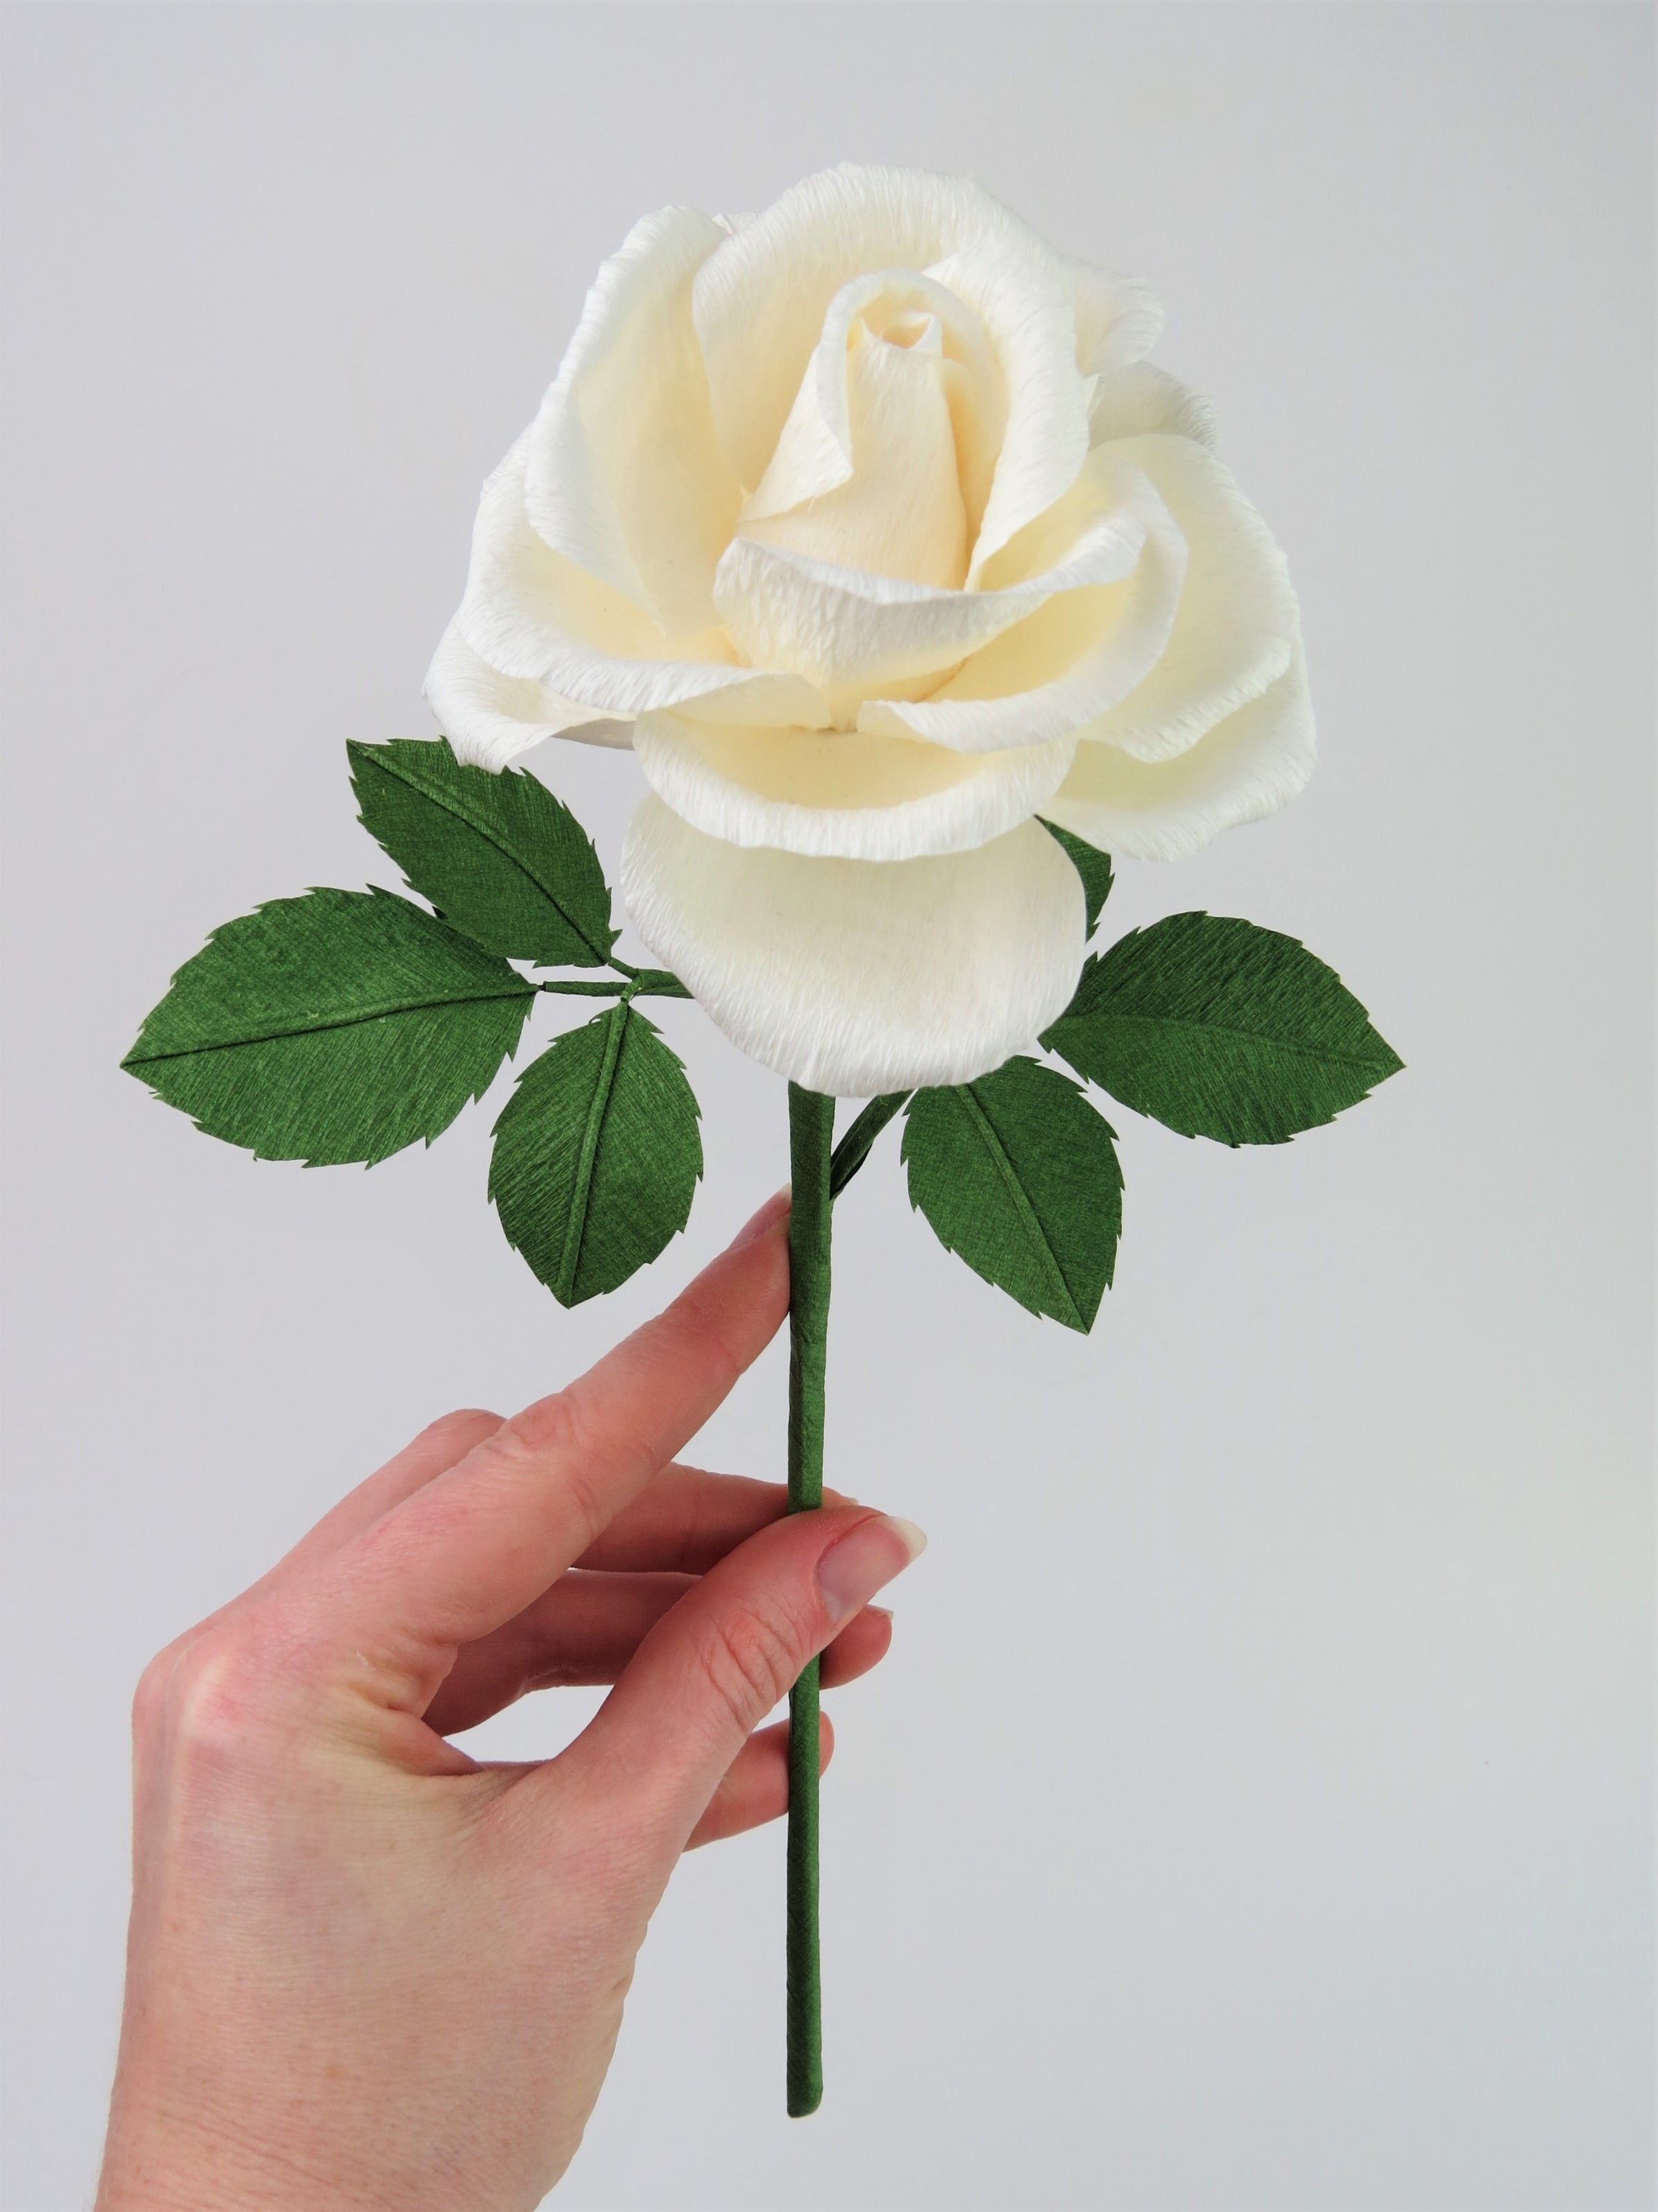 Pale white hand delicately holding the stem of a white paper rose with six leaves